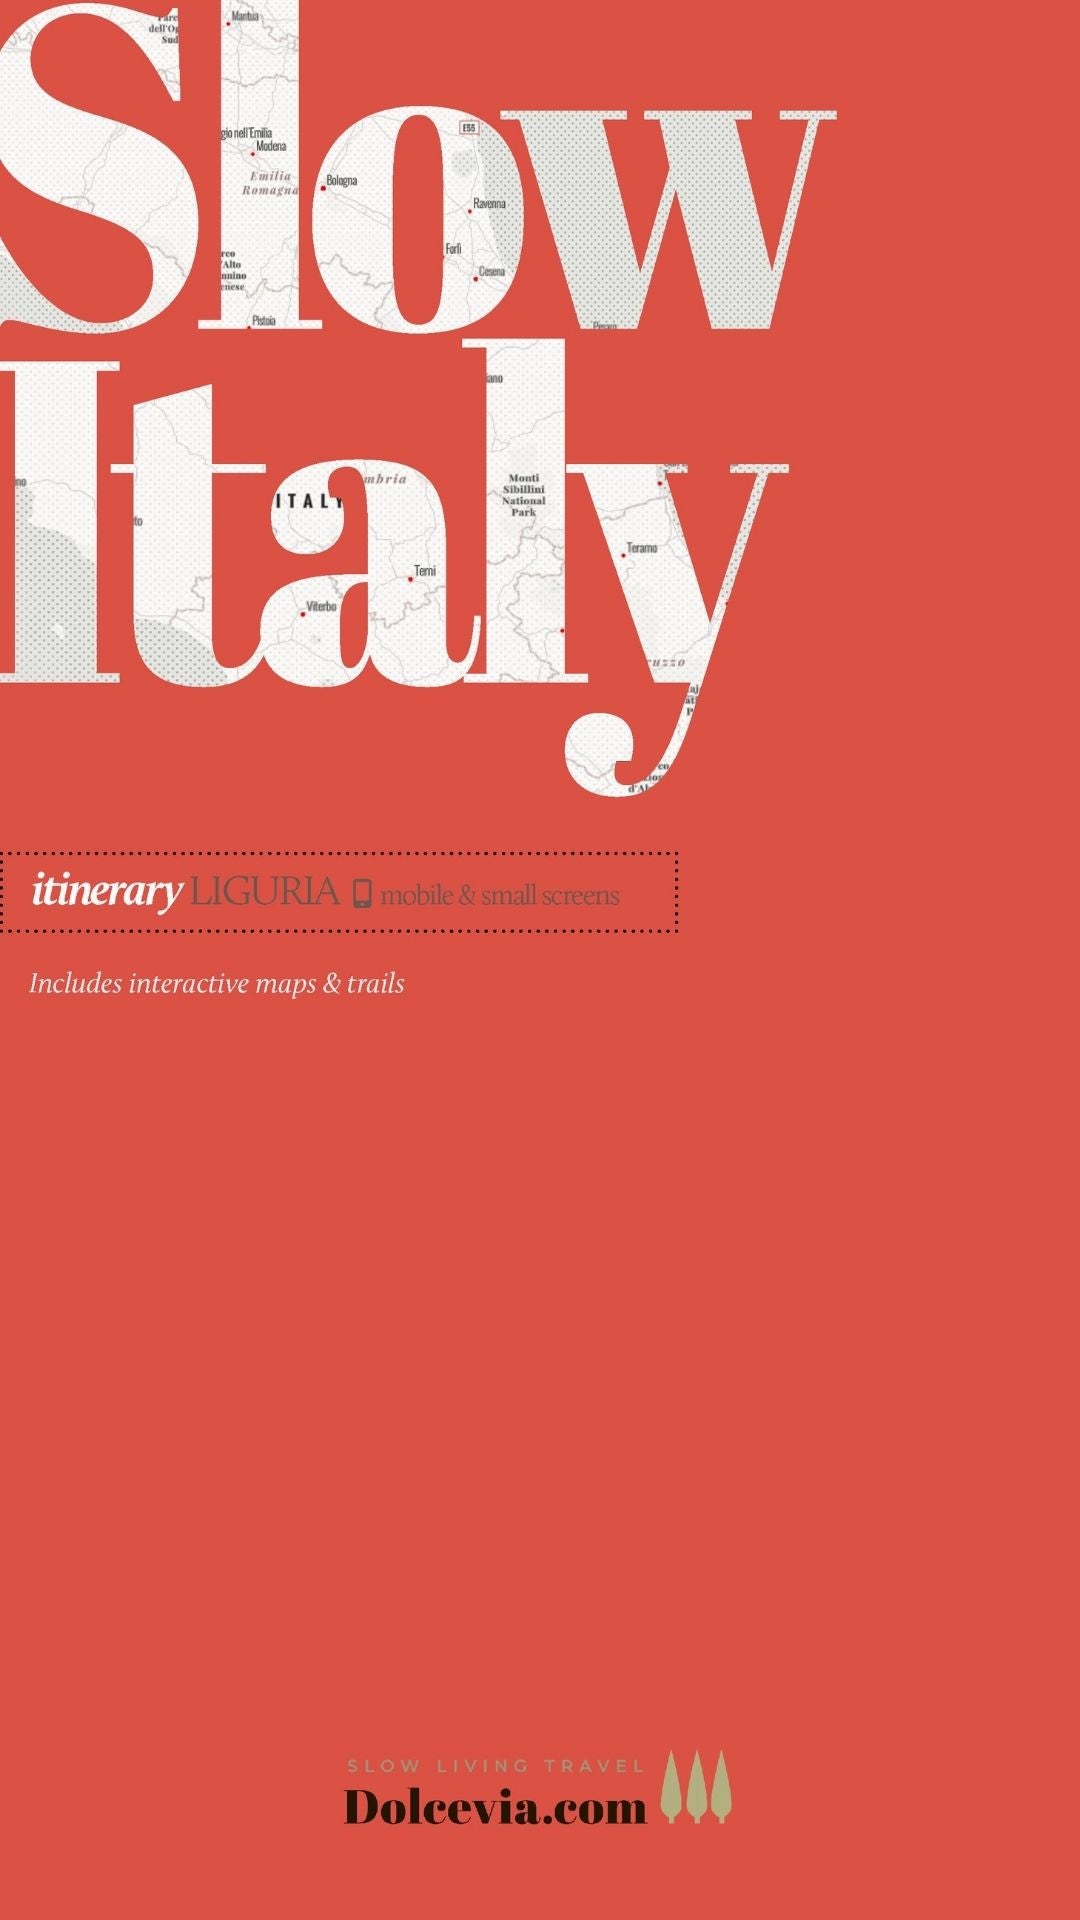 SlowItaly App-book Itinerary LIGURIA V 1.1 for Mobile English